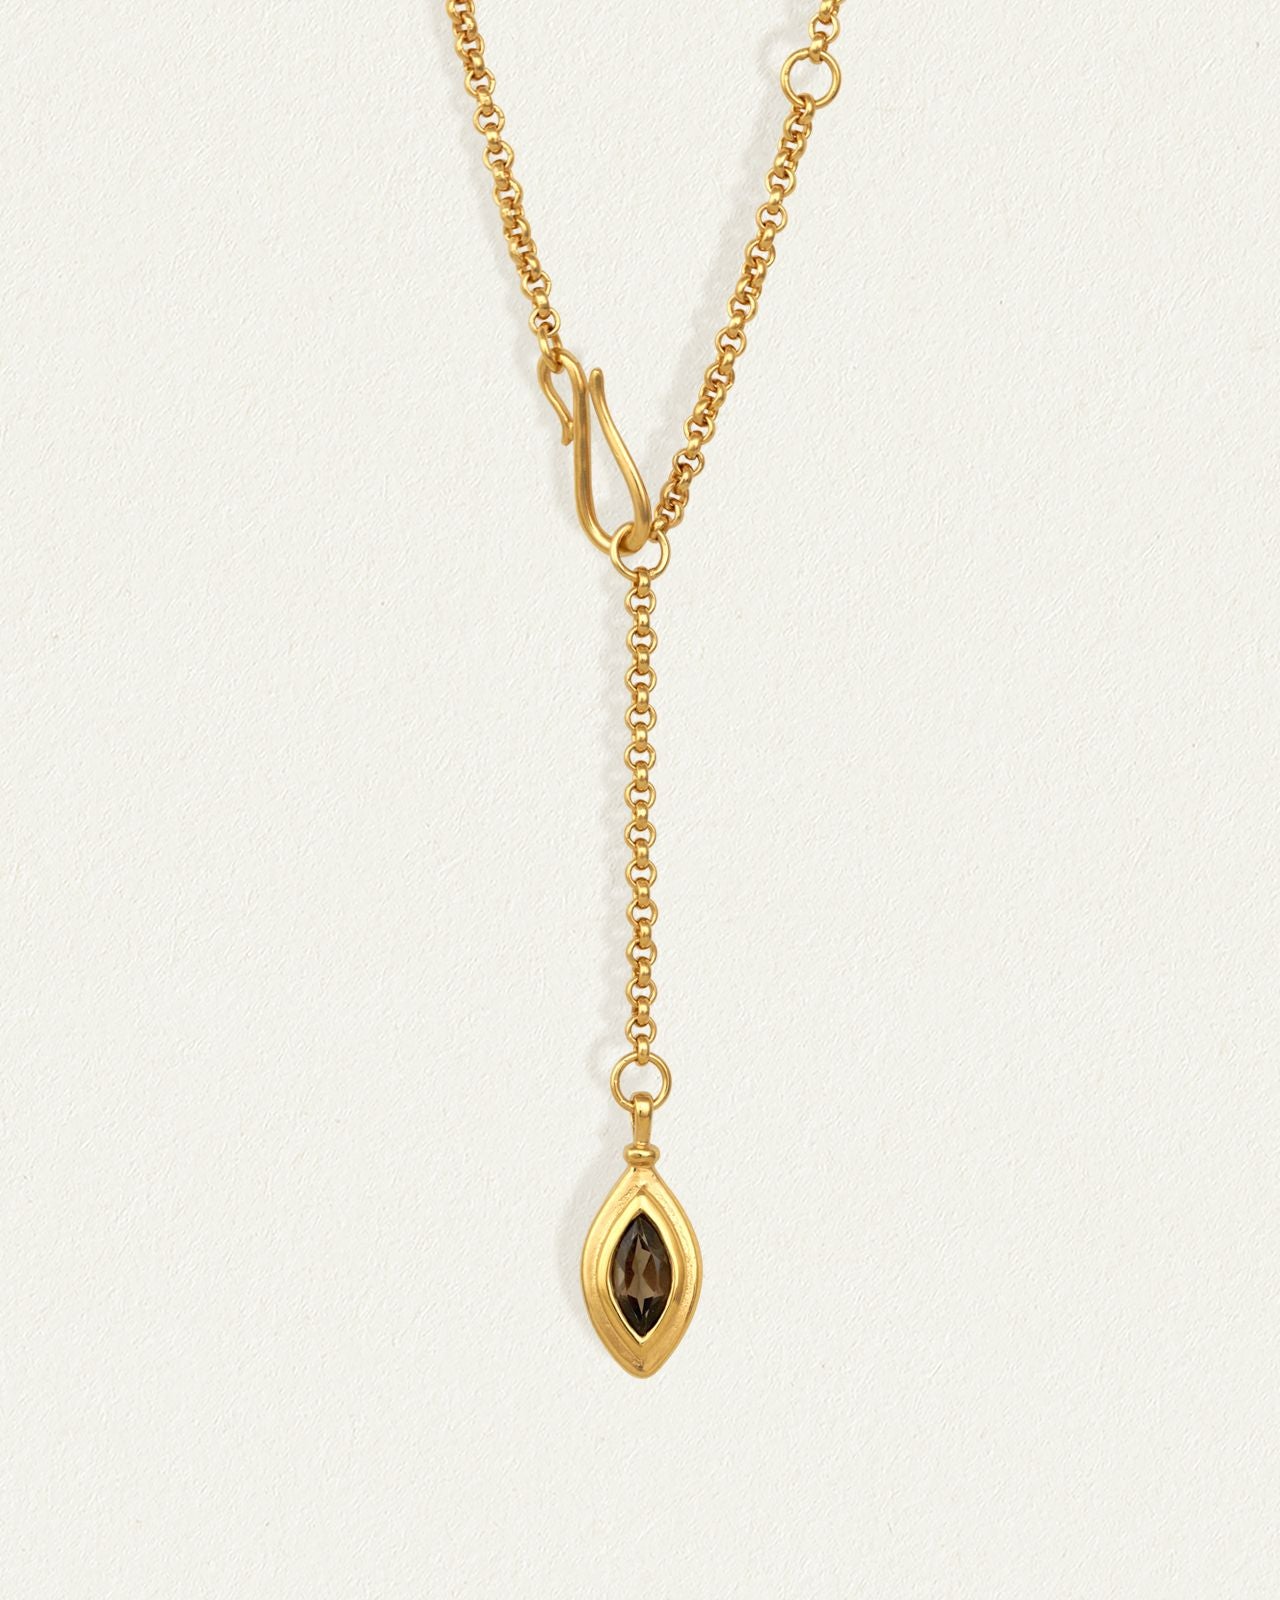 Temple of the Sun Aya Necklace, Gold